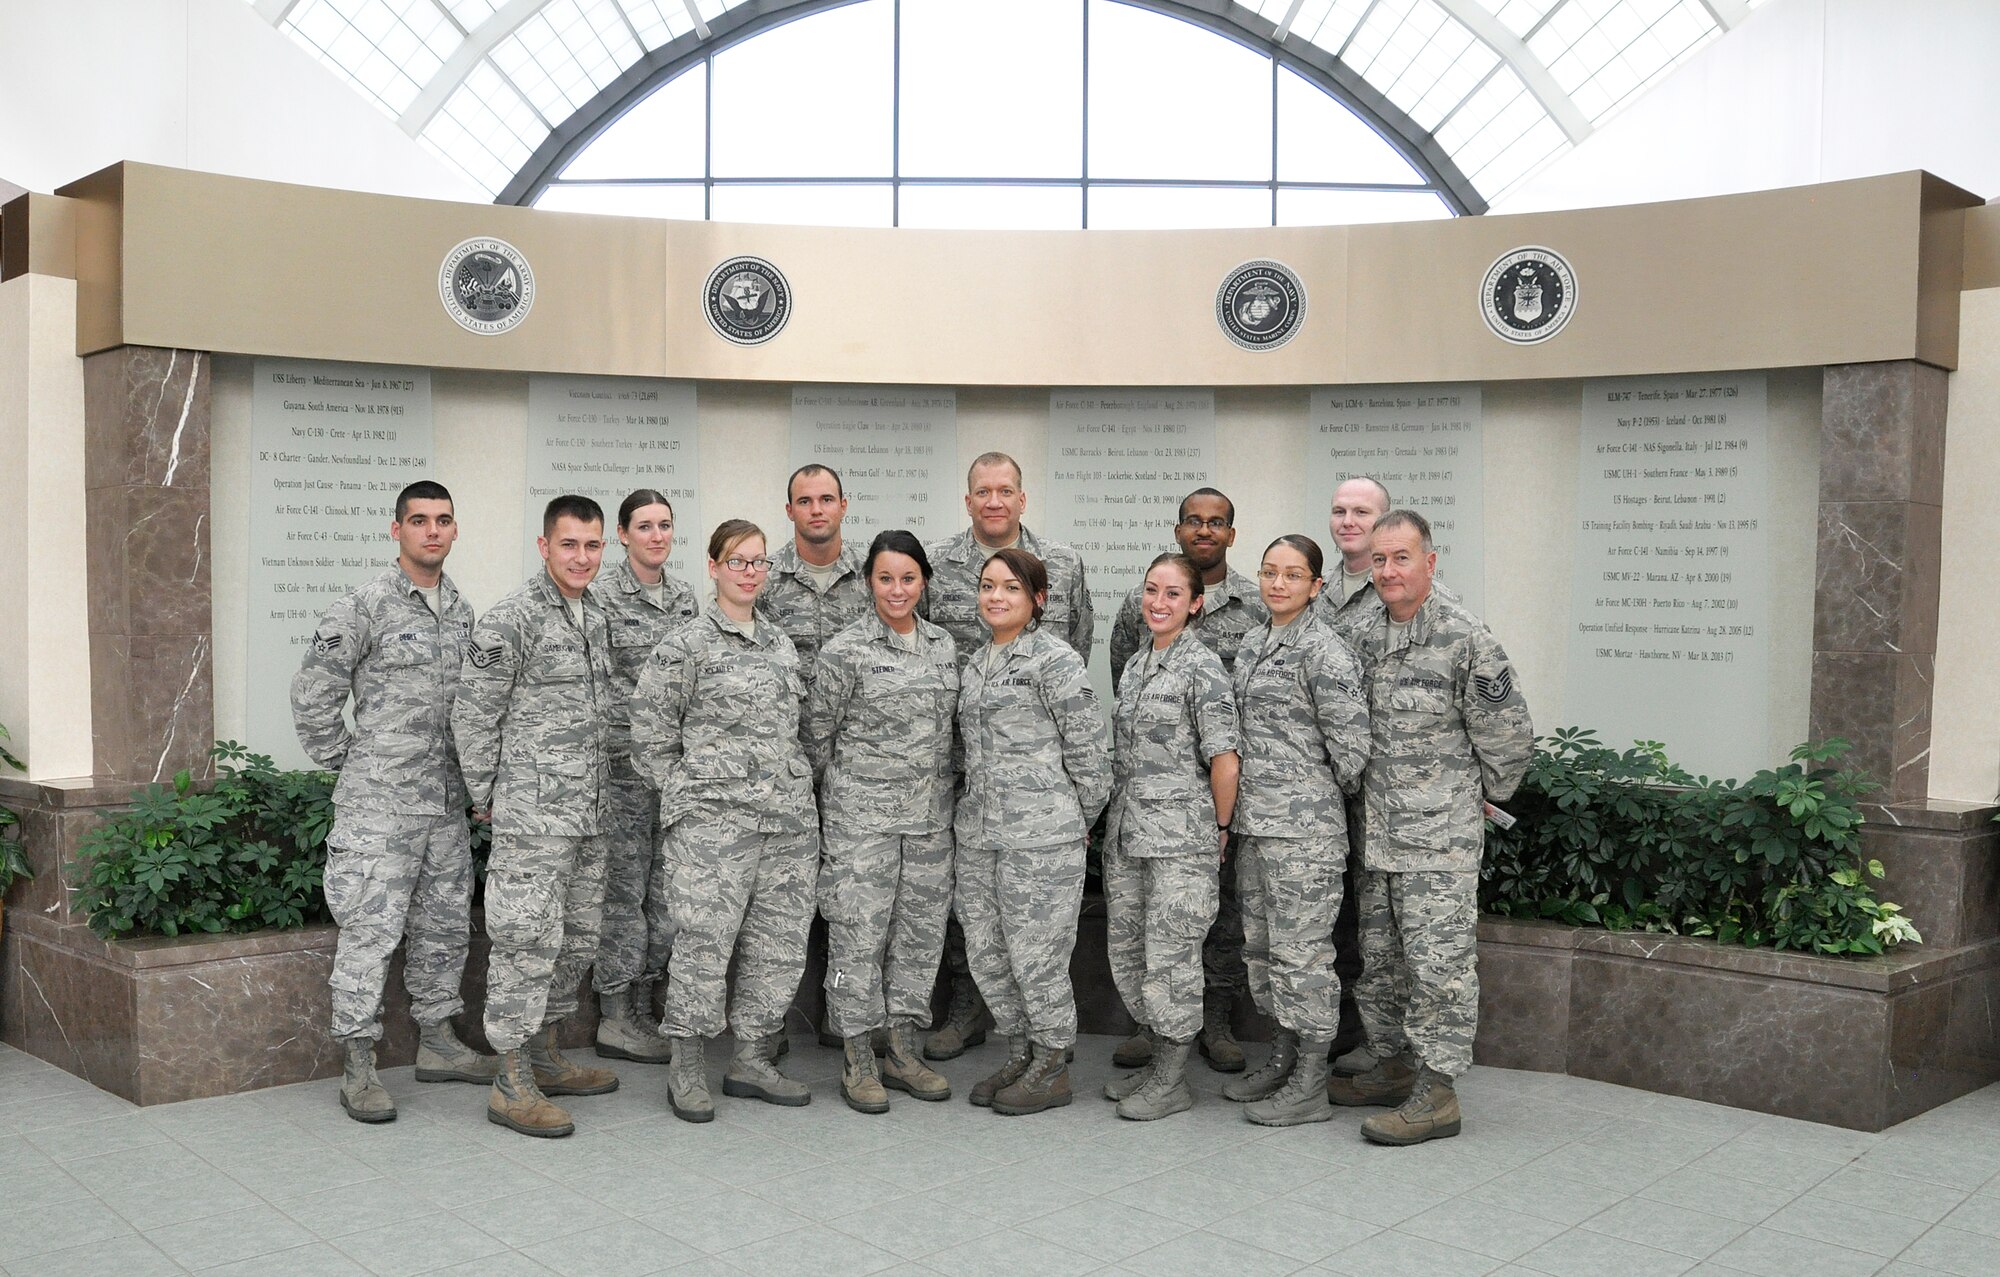 Thirteen members of the 914th Force Support Squadron, Niagara Falls Air Reserve Station, N.Y., pose for a photo in front of the memorial wall at the Charles C. Carson Center for Mortuary Affairs, Dover Air Force Base, Del., July 29, 2014. 914 FSS personnel were attending the Force Support Contingency Training course, hosted by Air Force Mortuary Affairs Operations, which is designed to fulfill mortuary training requirements for Air Force services personnel assigned to a mortuary unit tasking. (U.S. Air Force photo by Tech. Sgt. Myco Apat)